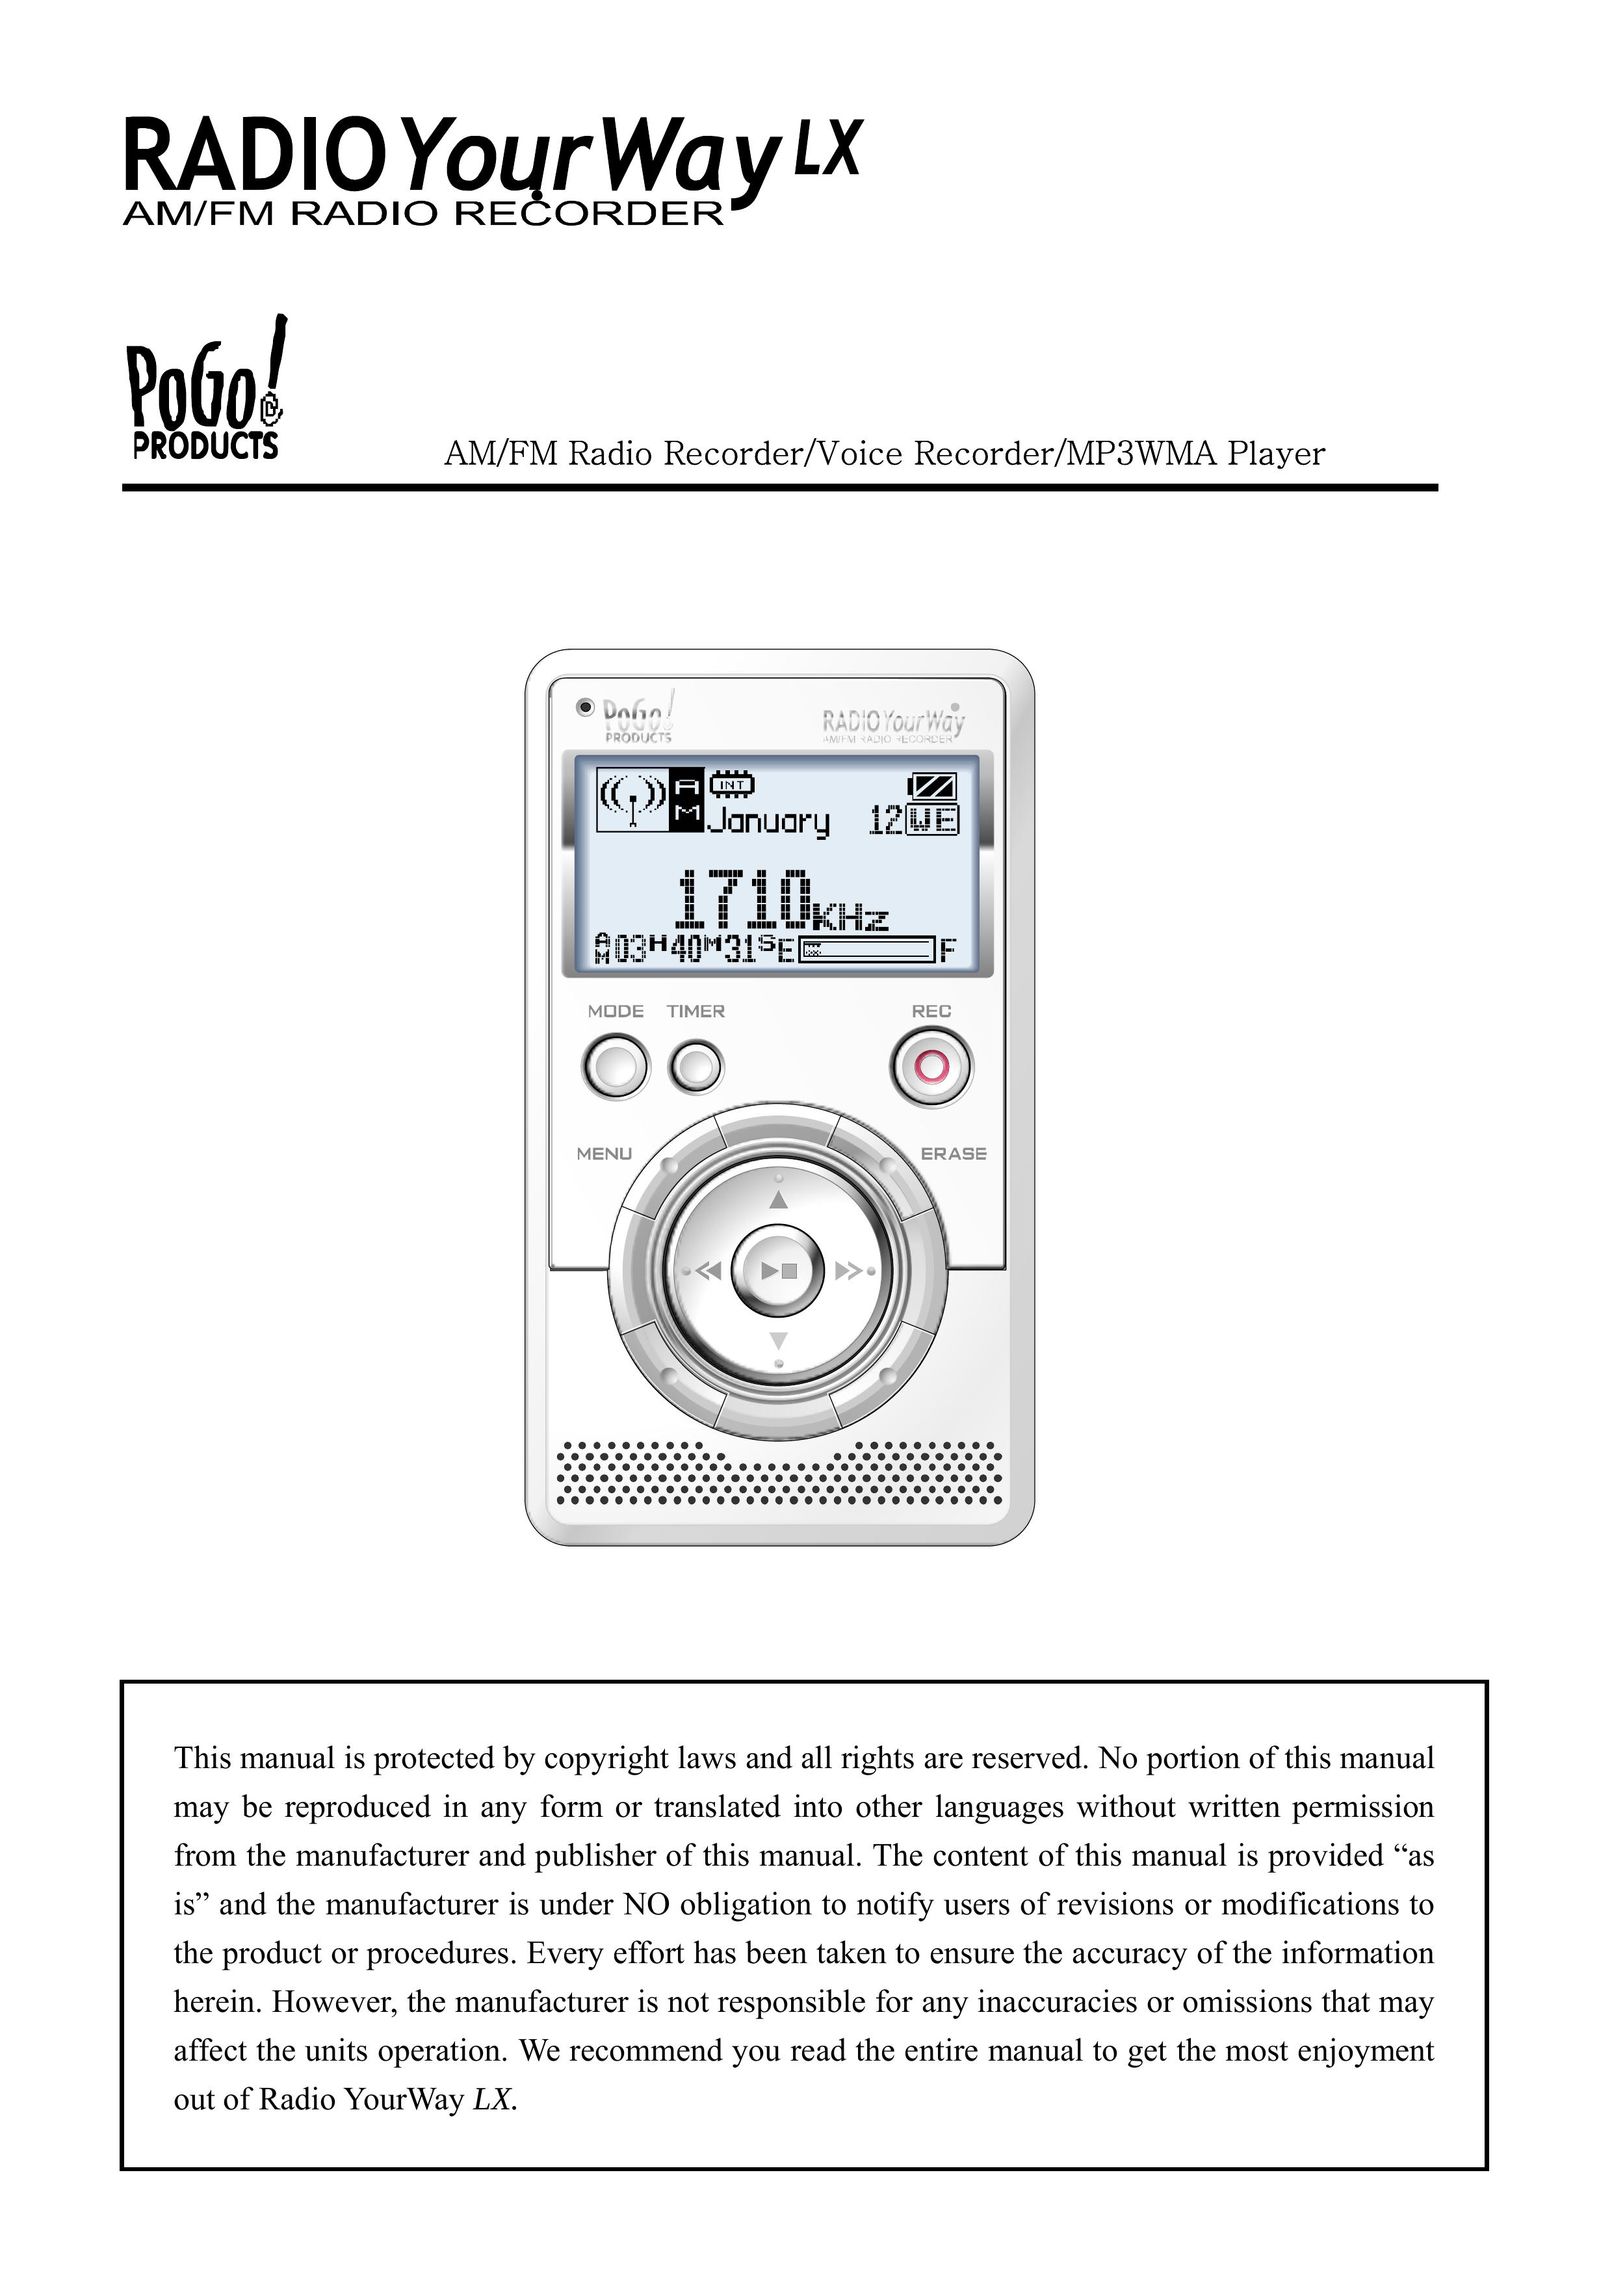 PoGo Products AM/FM Radio Recorder/Voice Recorder/MP3WMA Player Stereo System User Manual